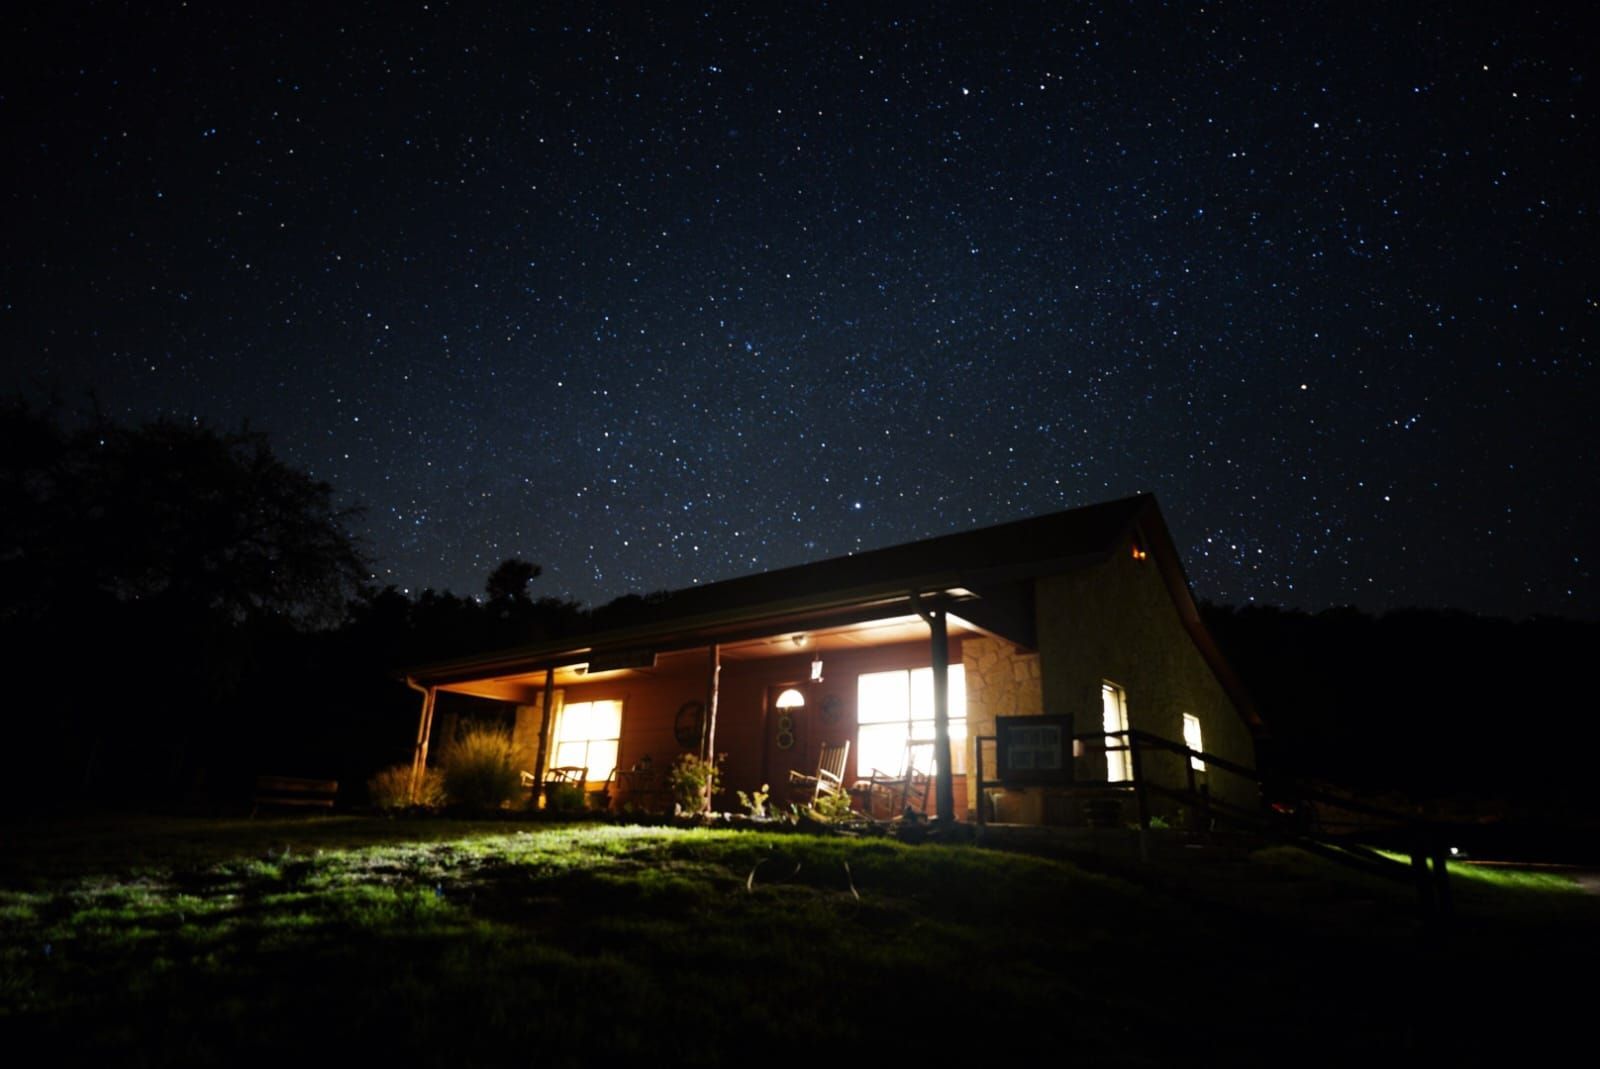 A house is lit up at night under a starry sky